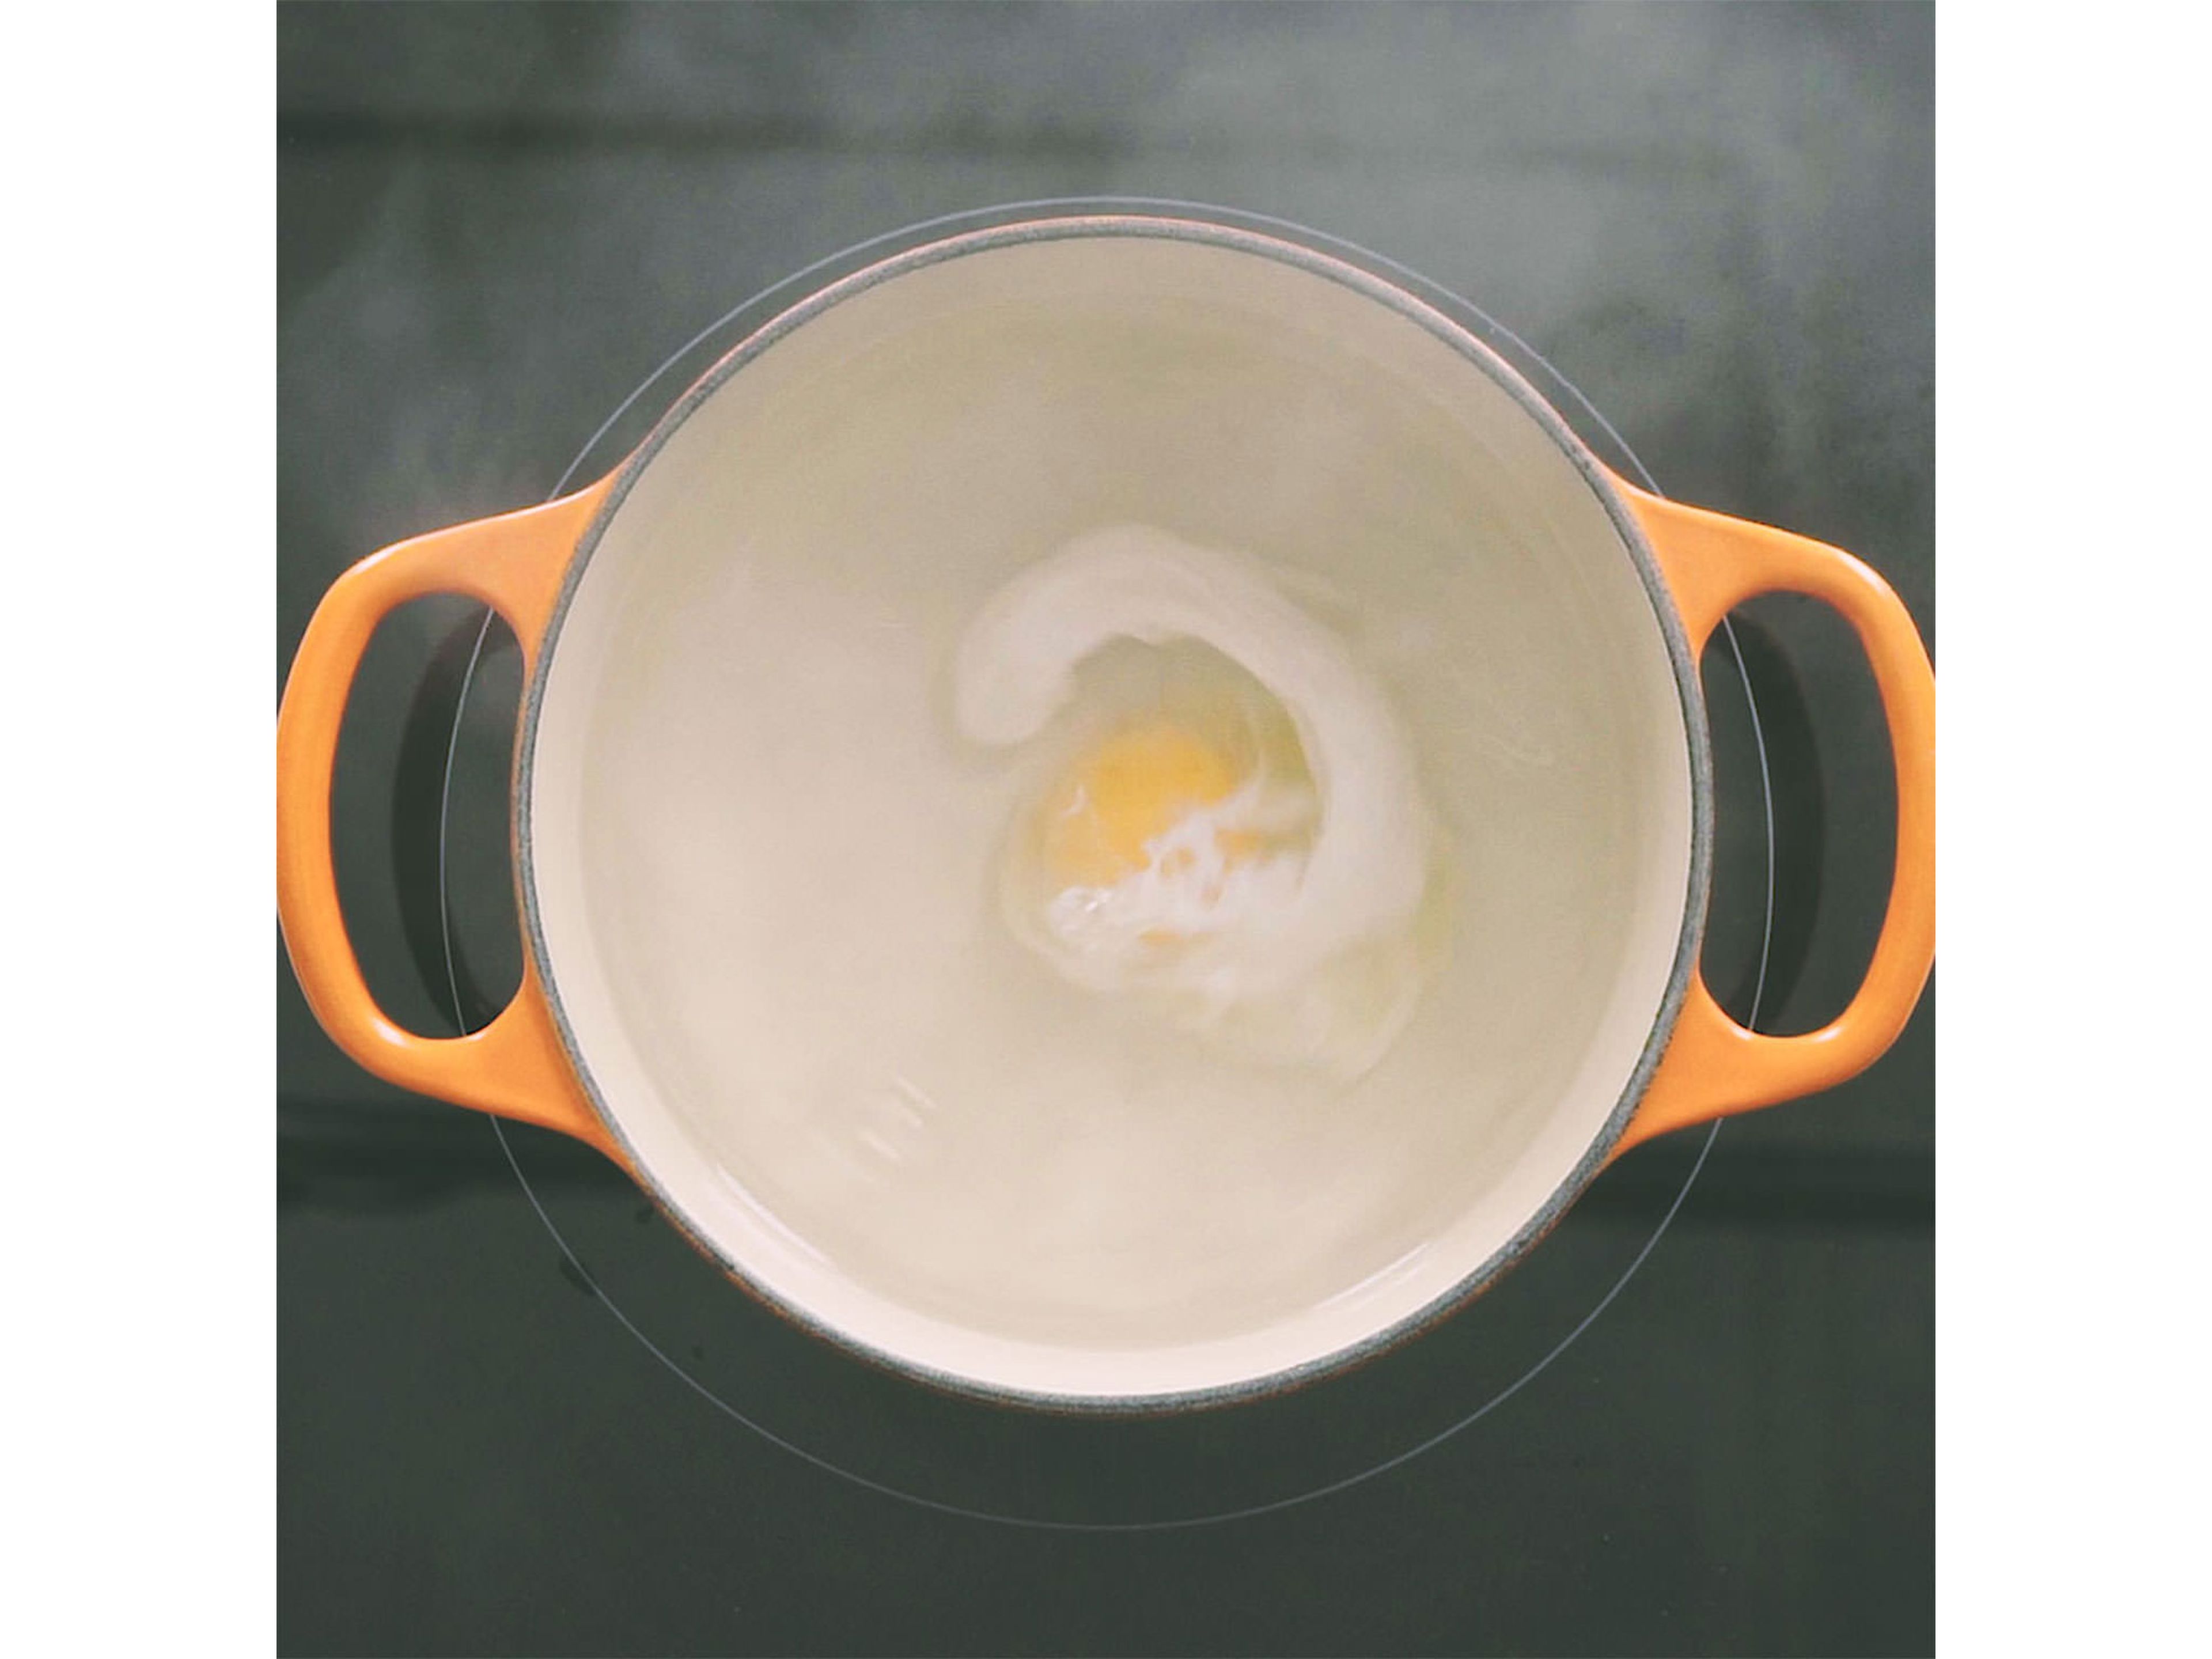 Bring a medium pot of water to a simmer. Add salt and white vinegar. Use wooden spoon to create a whirlpool, then slowly add egg. Let cook until egg white is set, approx. 3 min.